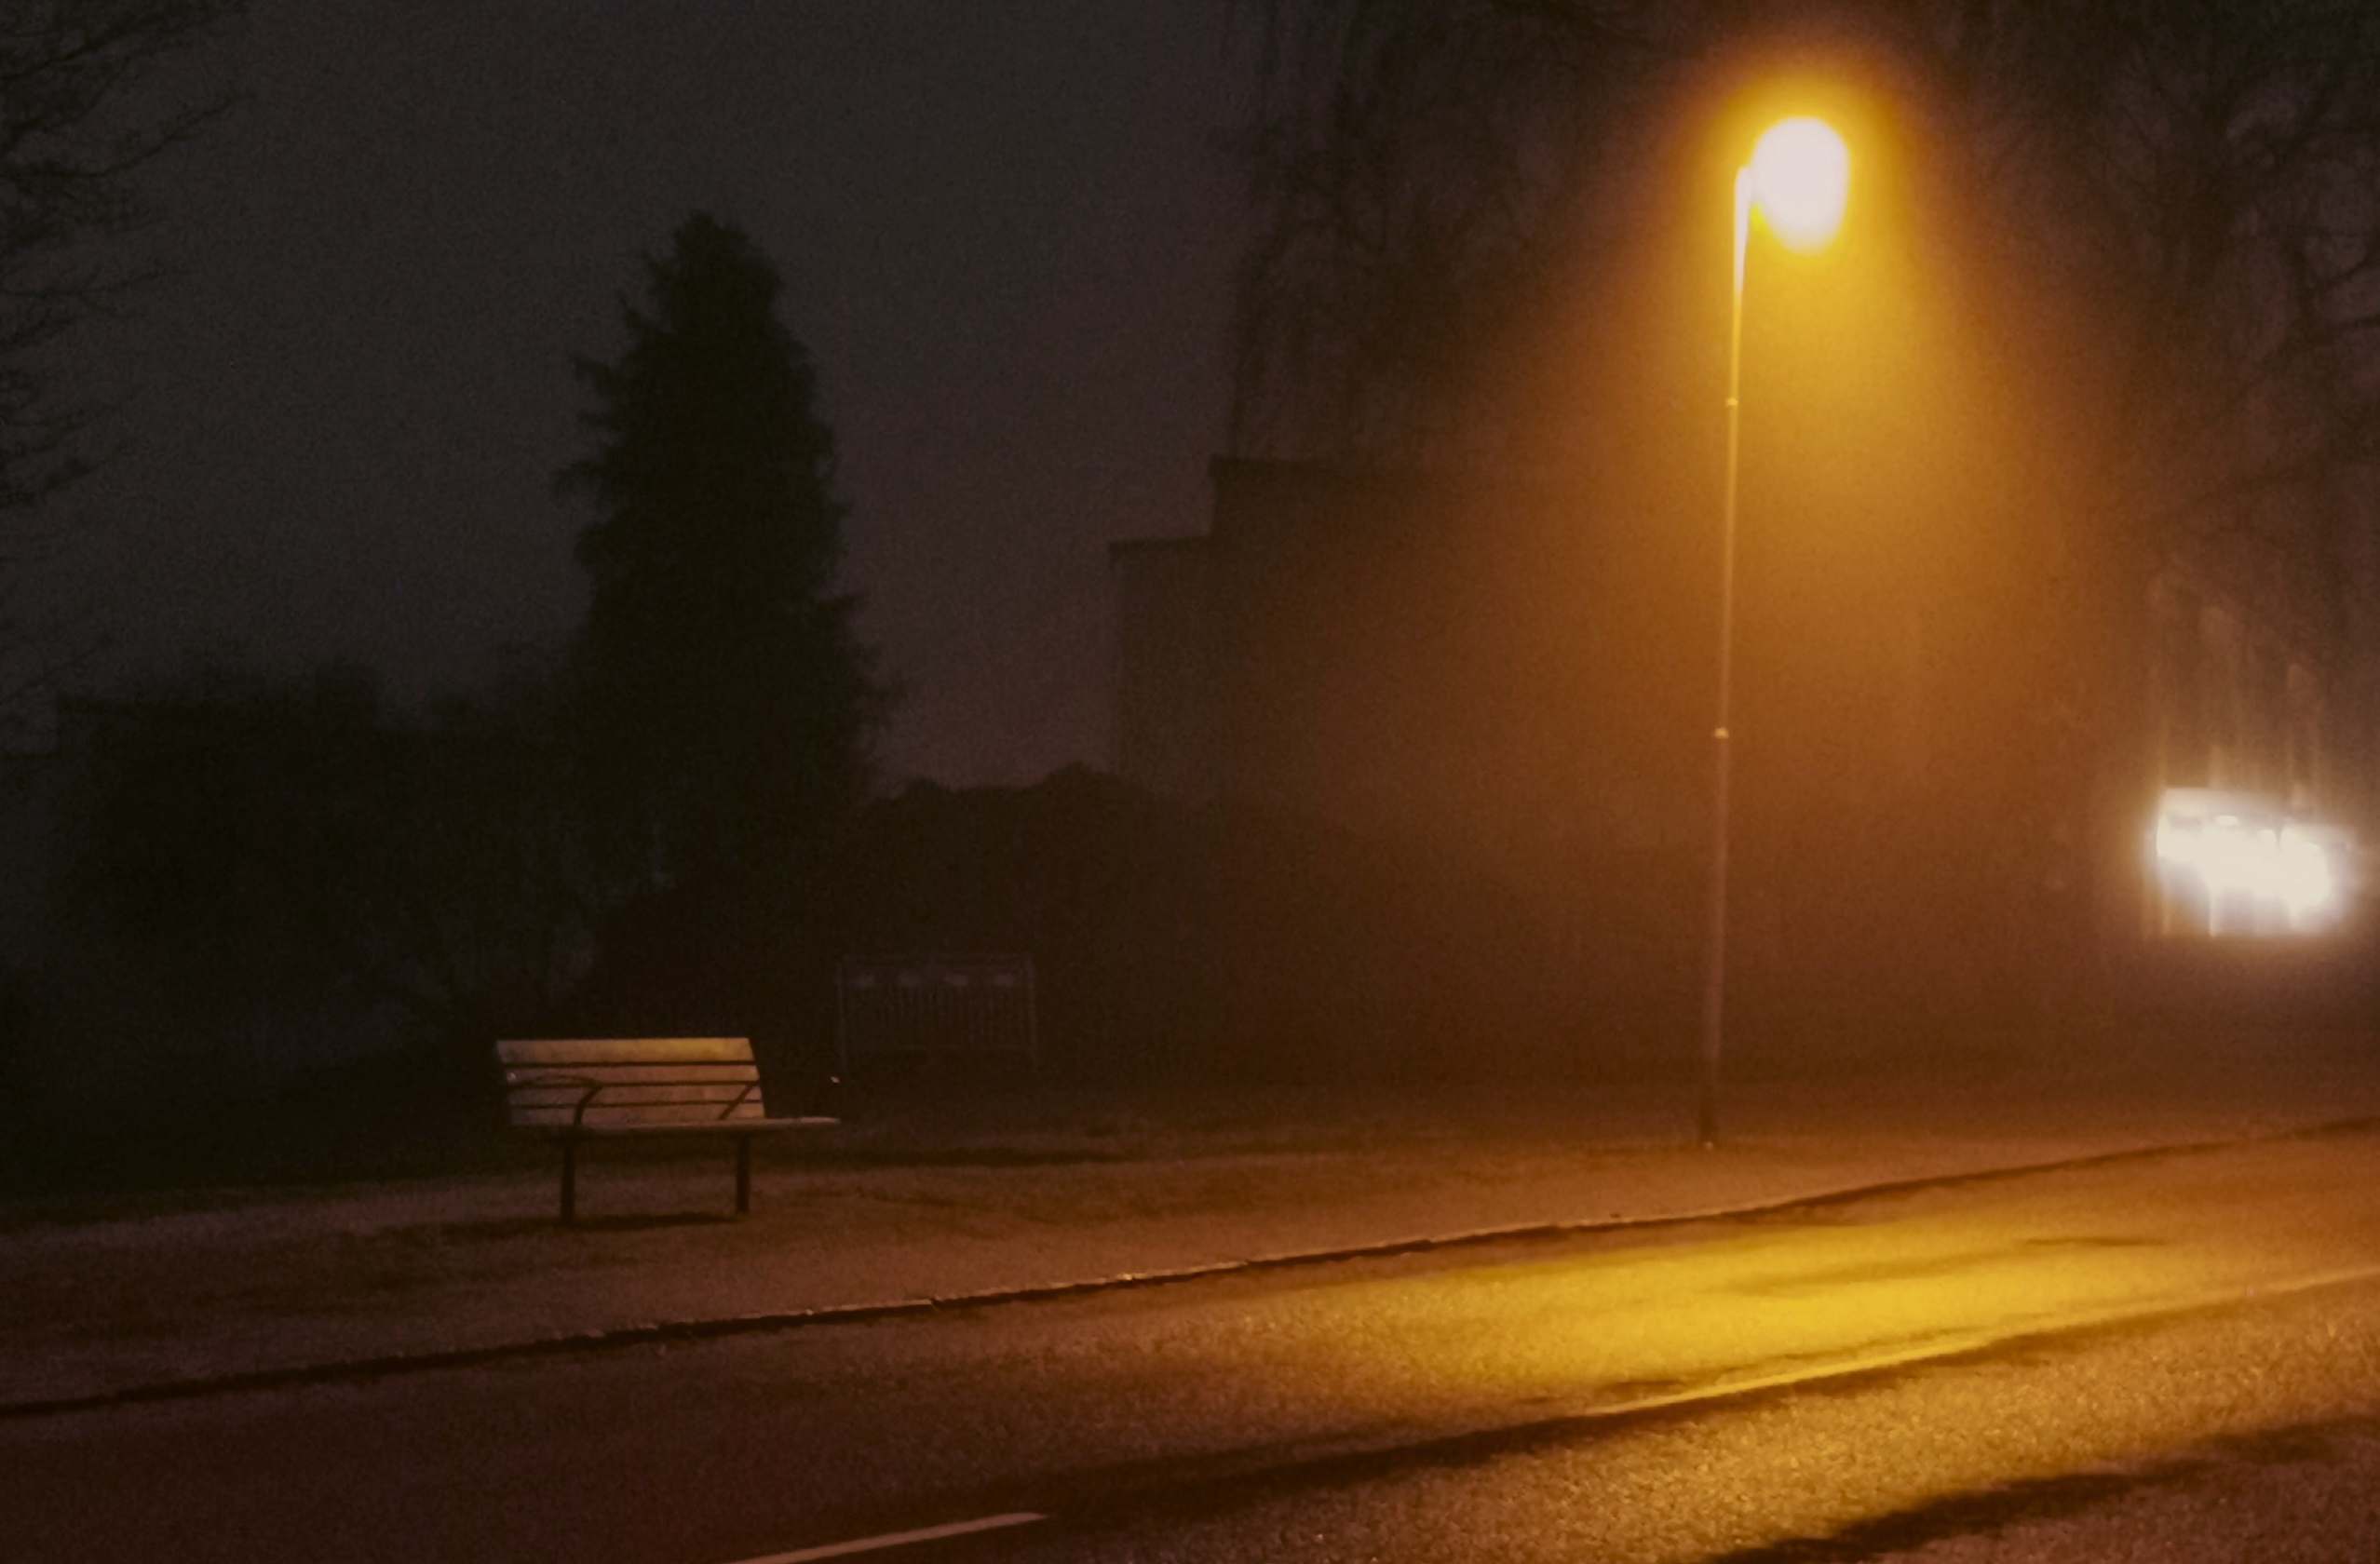 Photograph of a bench lit by a streetlight in the dark